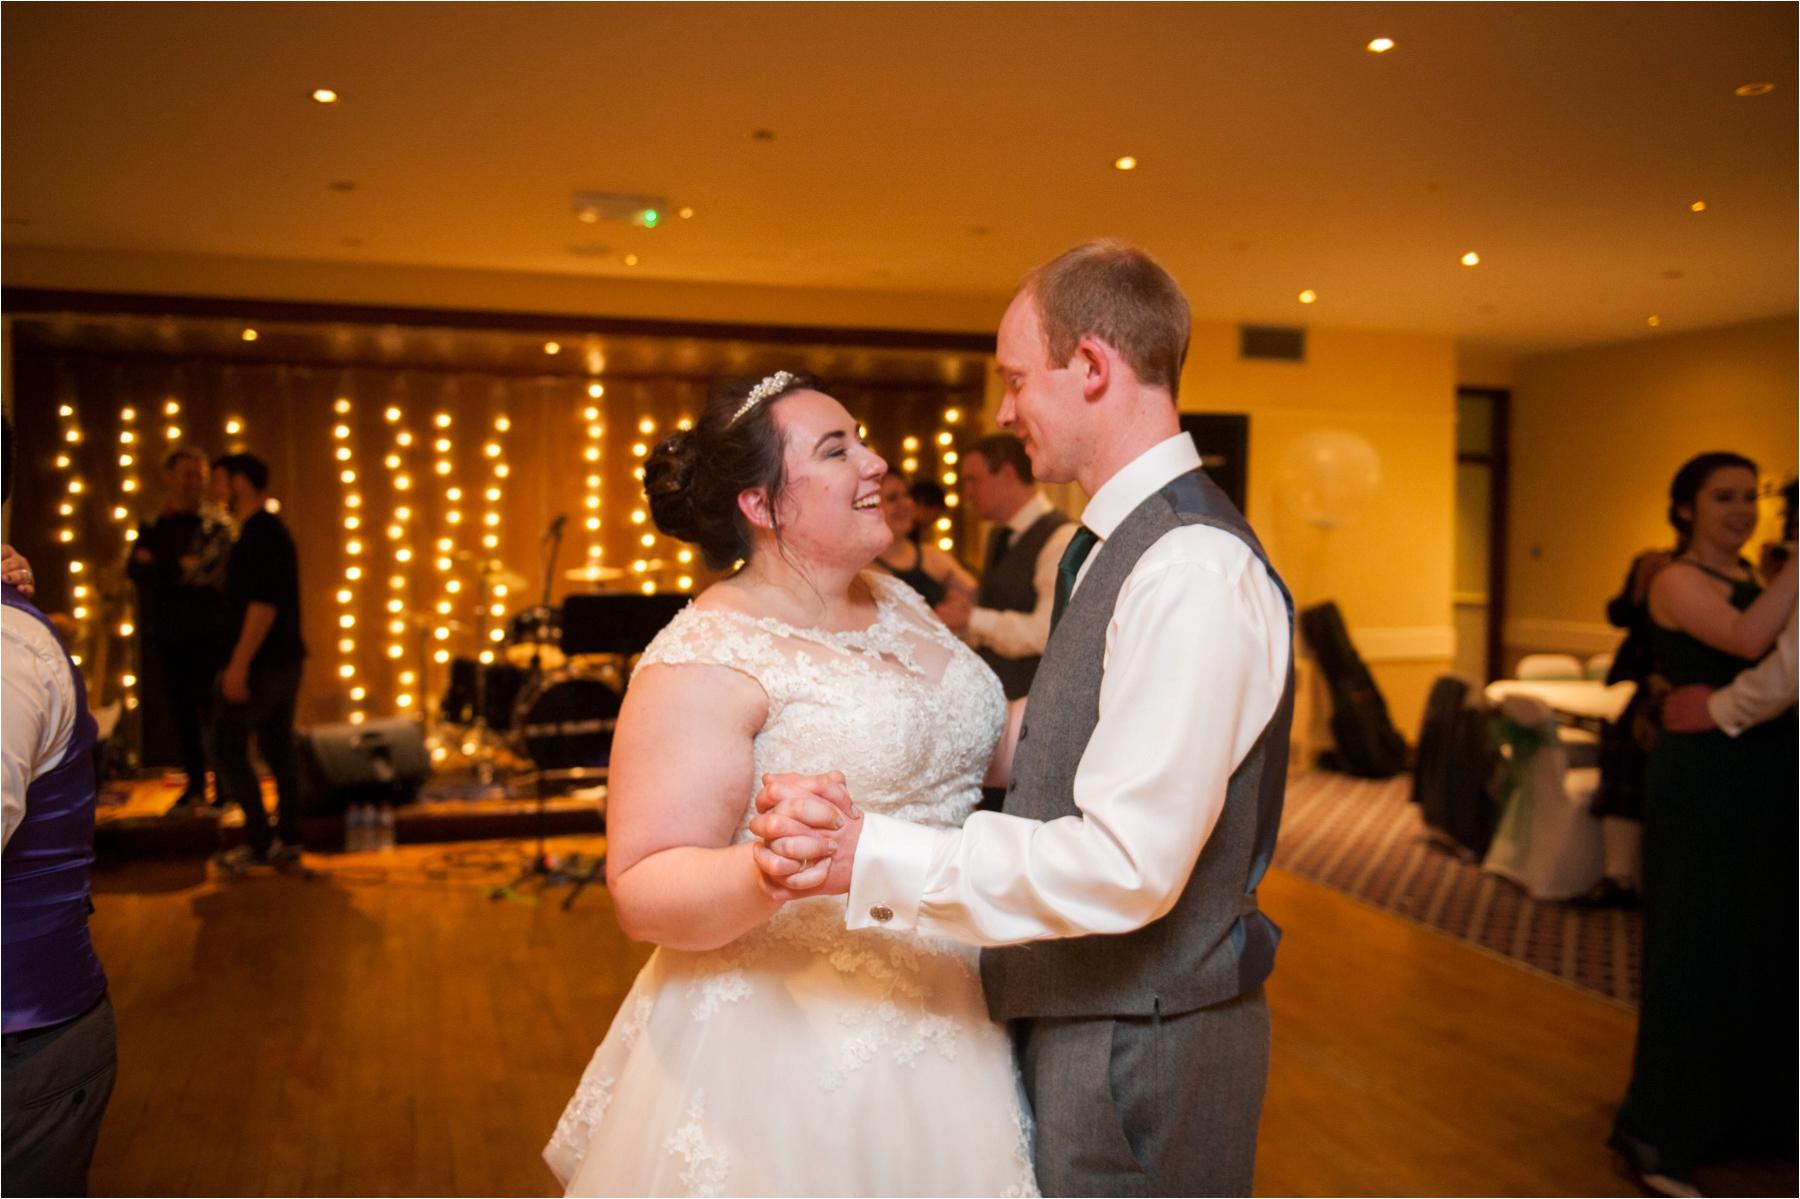 Bride Lauren and groom Michael have their first dance at the Caladh Inn as part of their wedding celebrations.